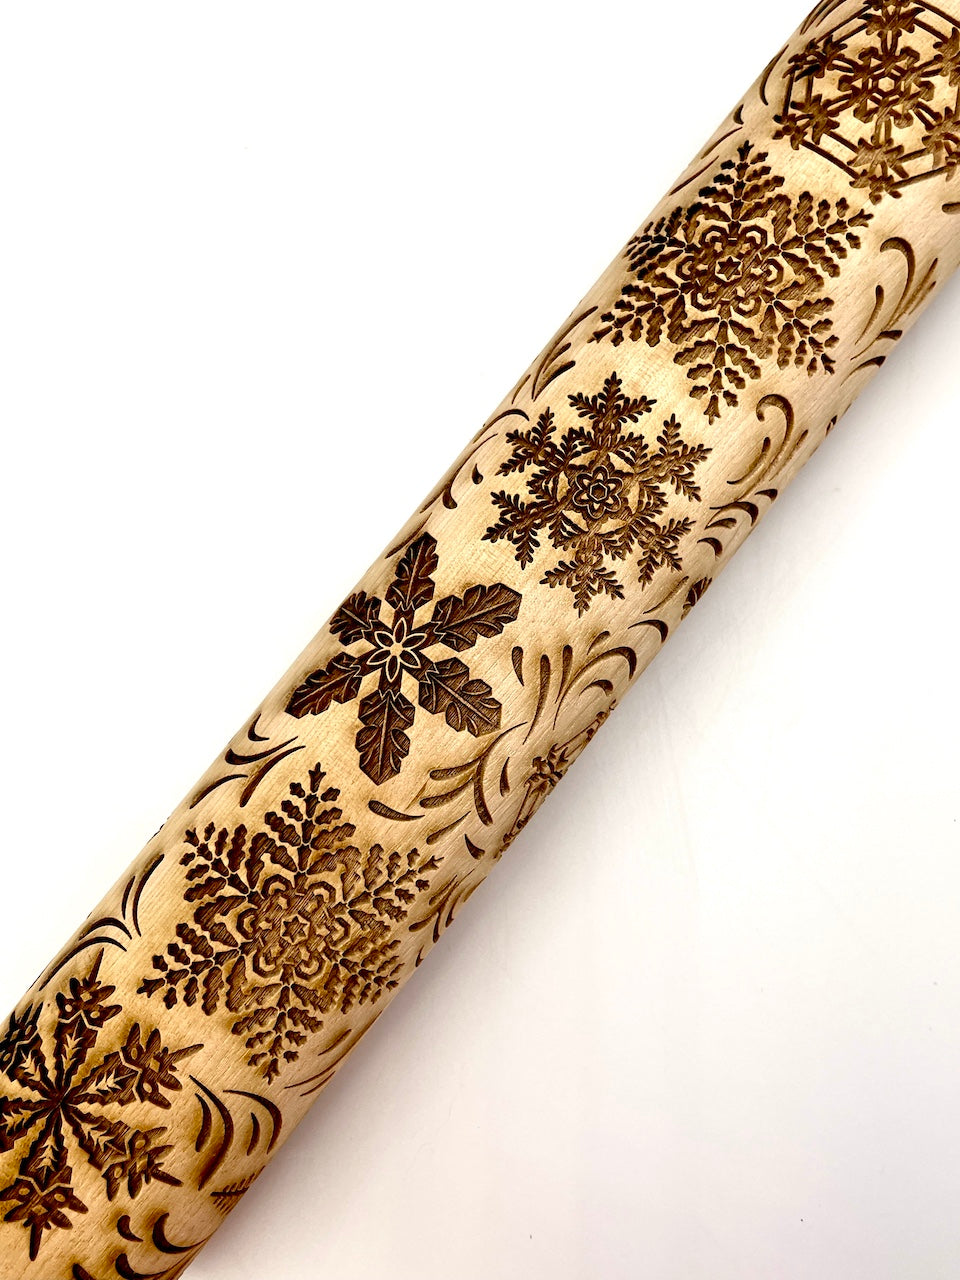 Snowflakes Textured Rolling Pin